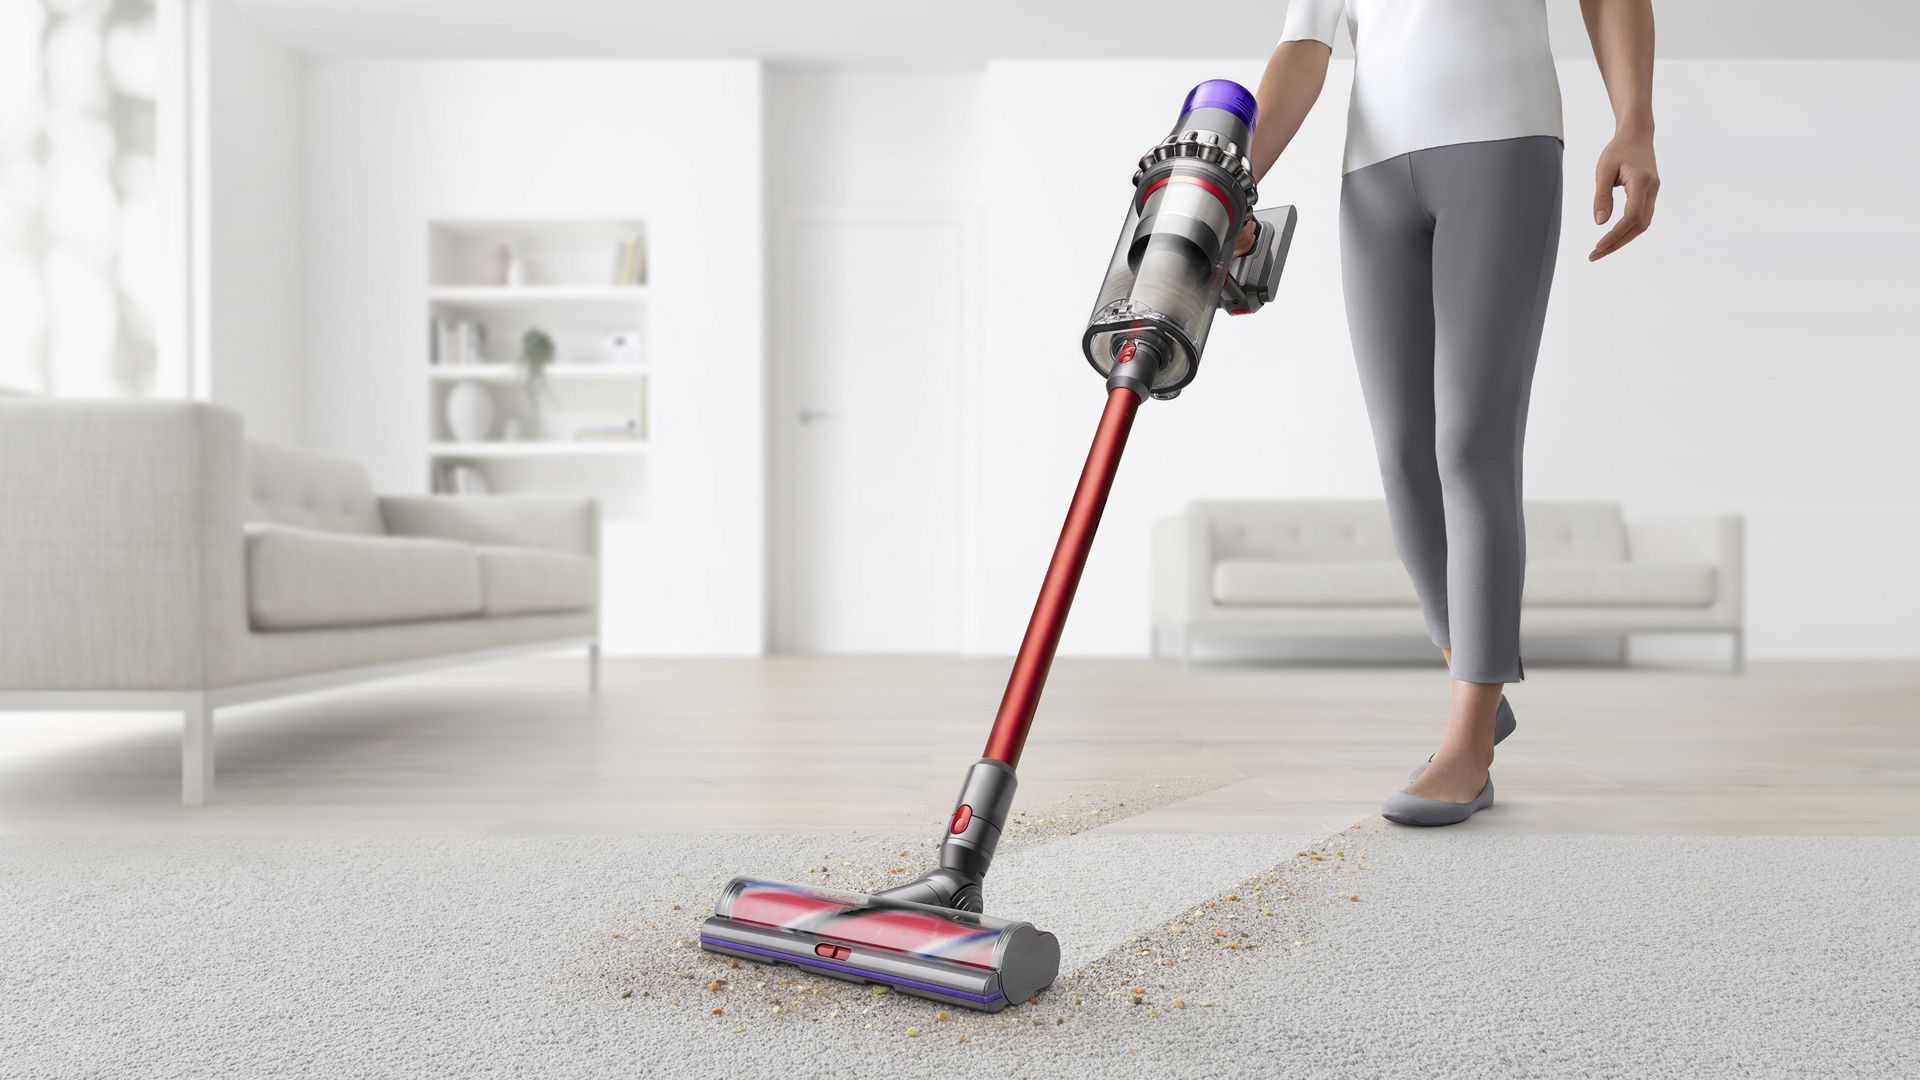 With Advanced Preparation The Carpet Cleaning North Shore Ready To Clean Your Carpet